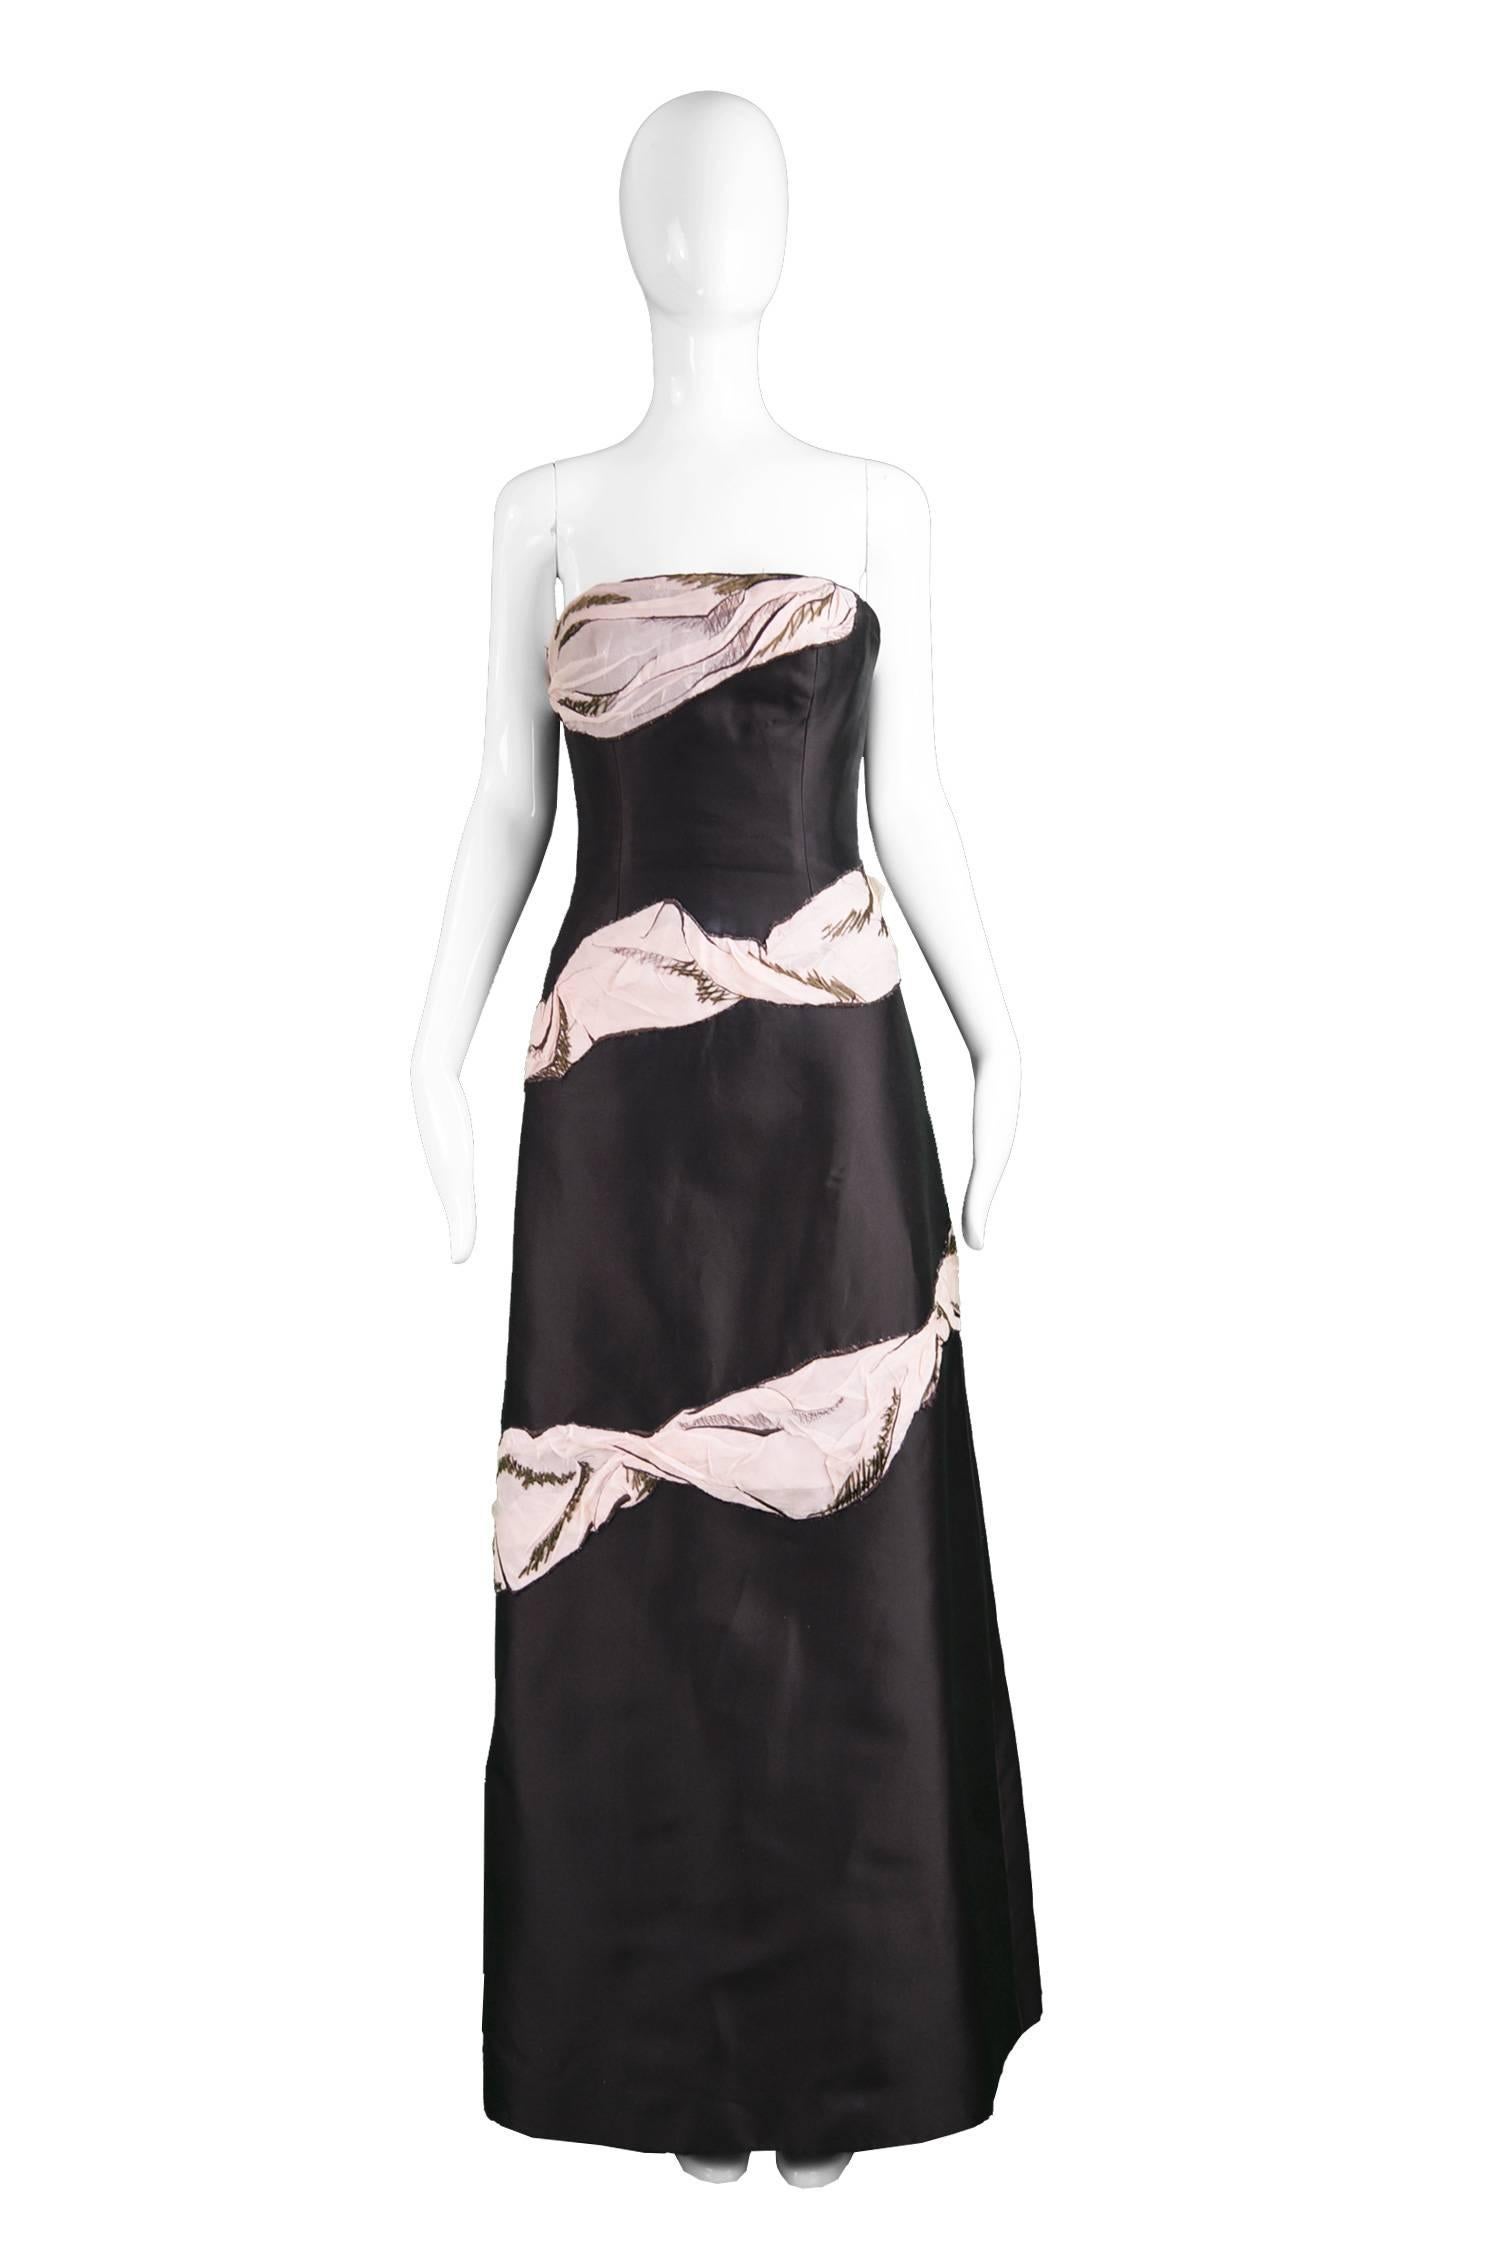 Bruce Oldfield Couture Trompe L'oeil Embroidered Silk & Organza Strapless Gown

Estimated Size: UK 10/ US 6/ EU 38. Please check measurements.
Bust - Approx 34” / 86cm
Waist - 28” / 71cm
Inner Waistband - 26” / 66cm (Inner waistband has been taken